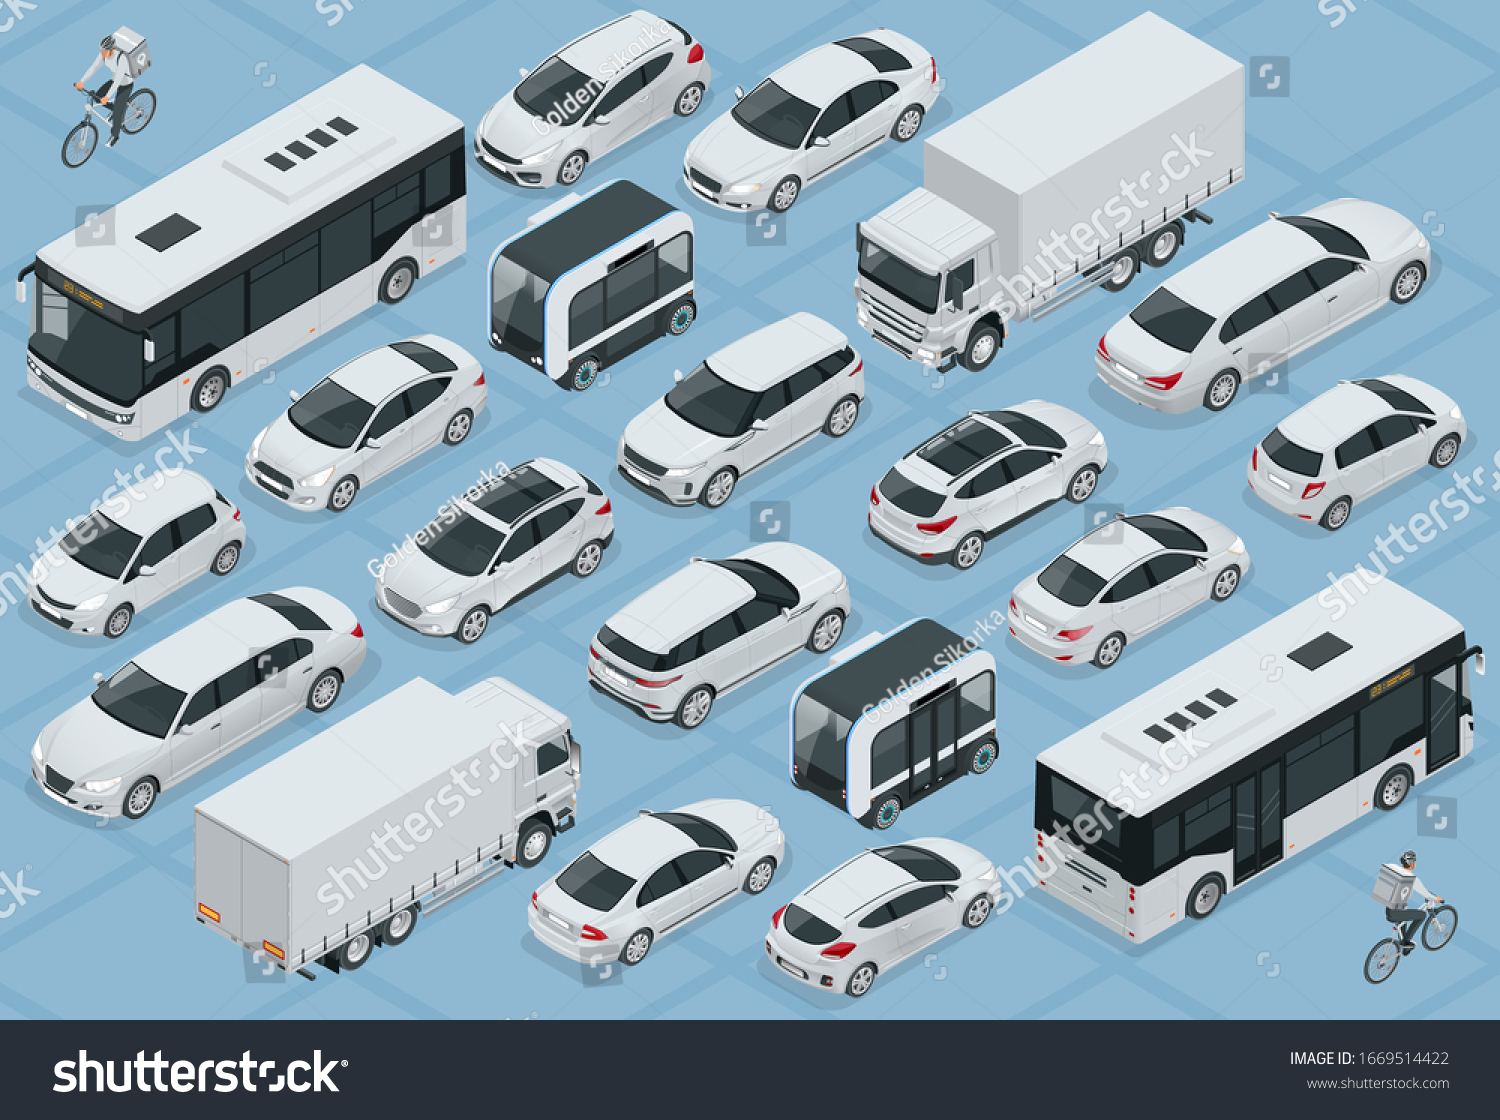 SVG of Flat 3d isometric high quality city transport car icon set. Bus, bicycle courier, Sedan, van, cargo truck, off-road, bike, mini and sport cars. Urban public and freight vehihle svg